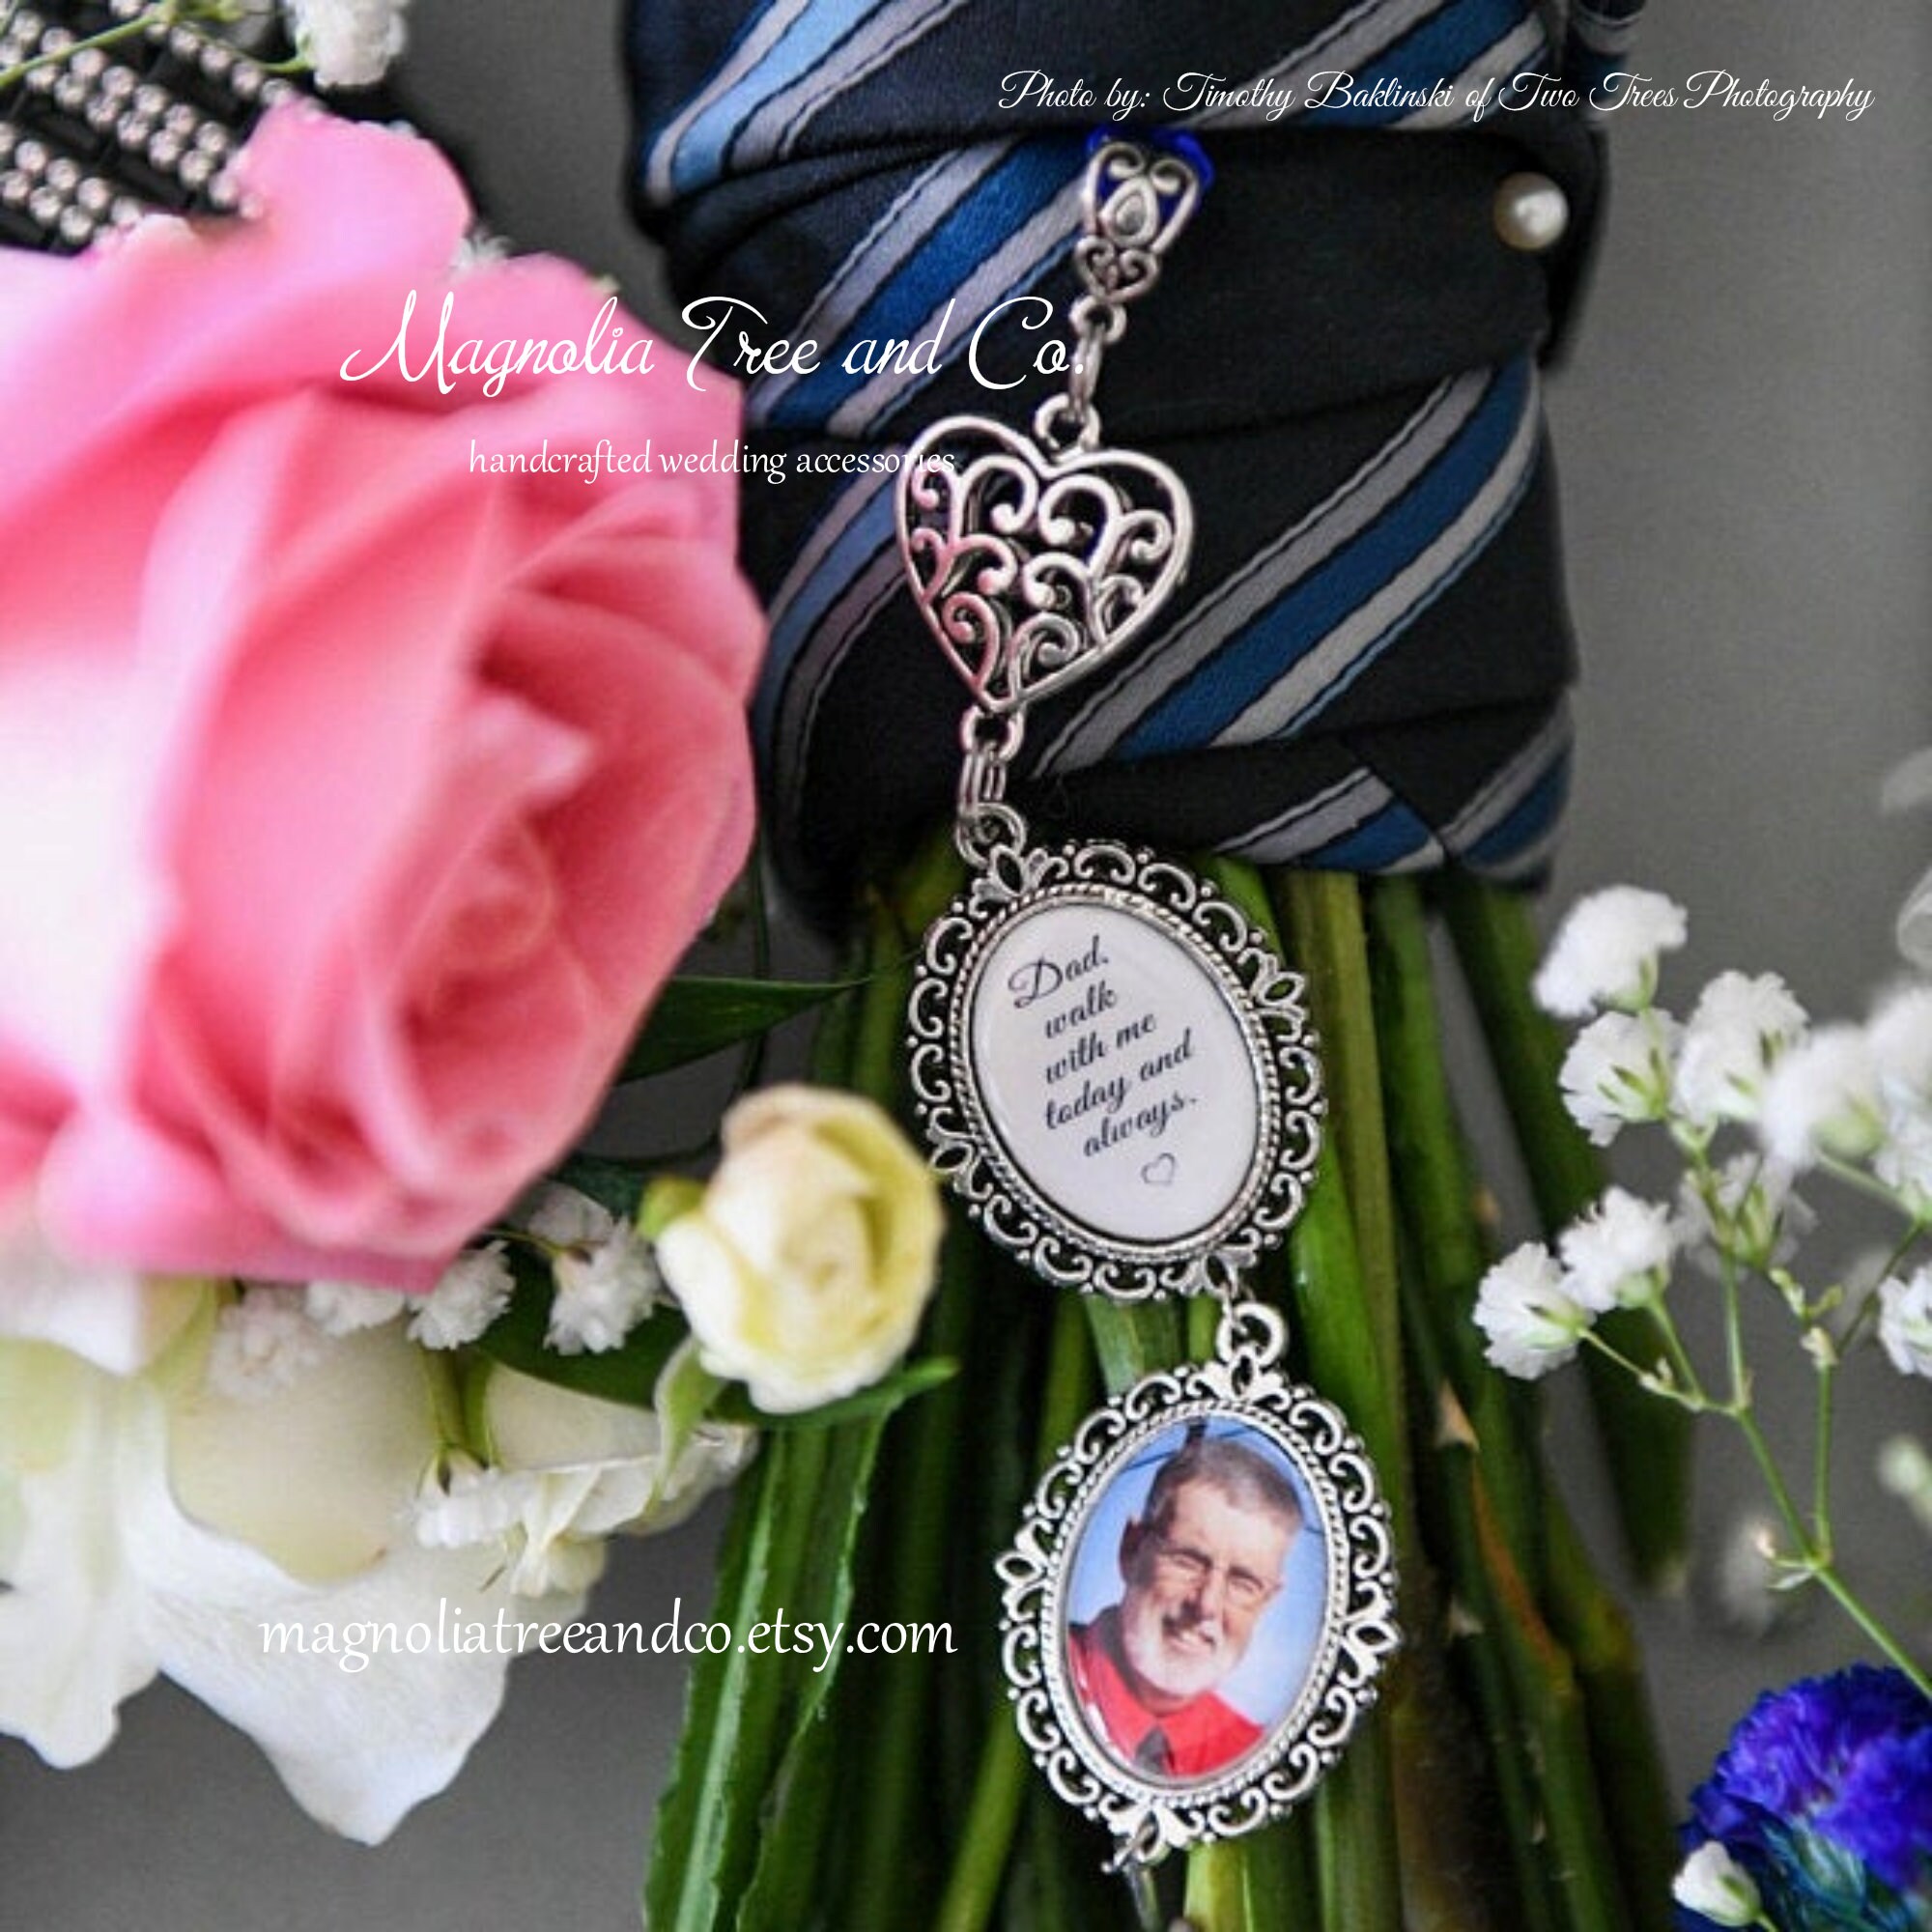  Wedding Bouquet Charm, Bouquet Charms for Wedding Memory,  Bridal Lacy Oval Photo Charm, Memorial Bride Angel Pendant for Bridal  Shower Party, You are Always in My Heart : Home & Kitchen